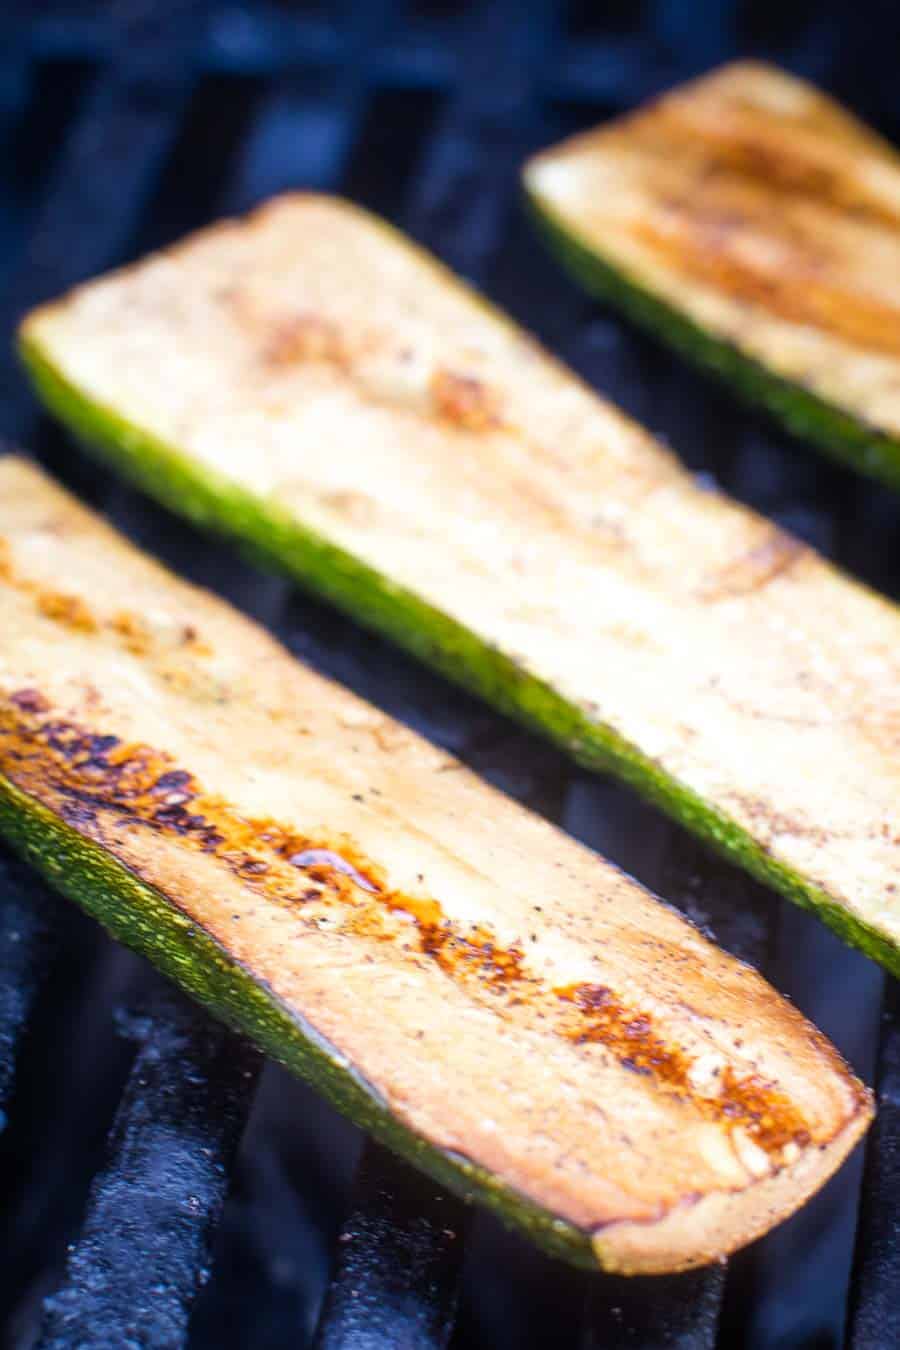 Grilled Zucchini on grill grates